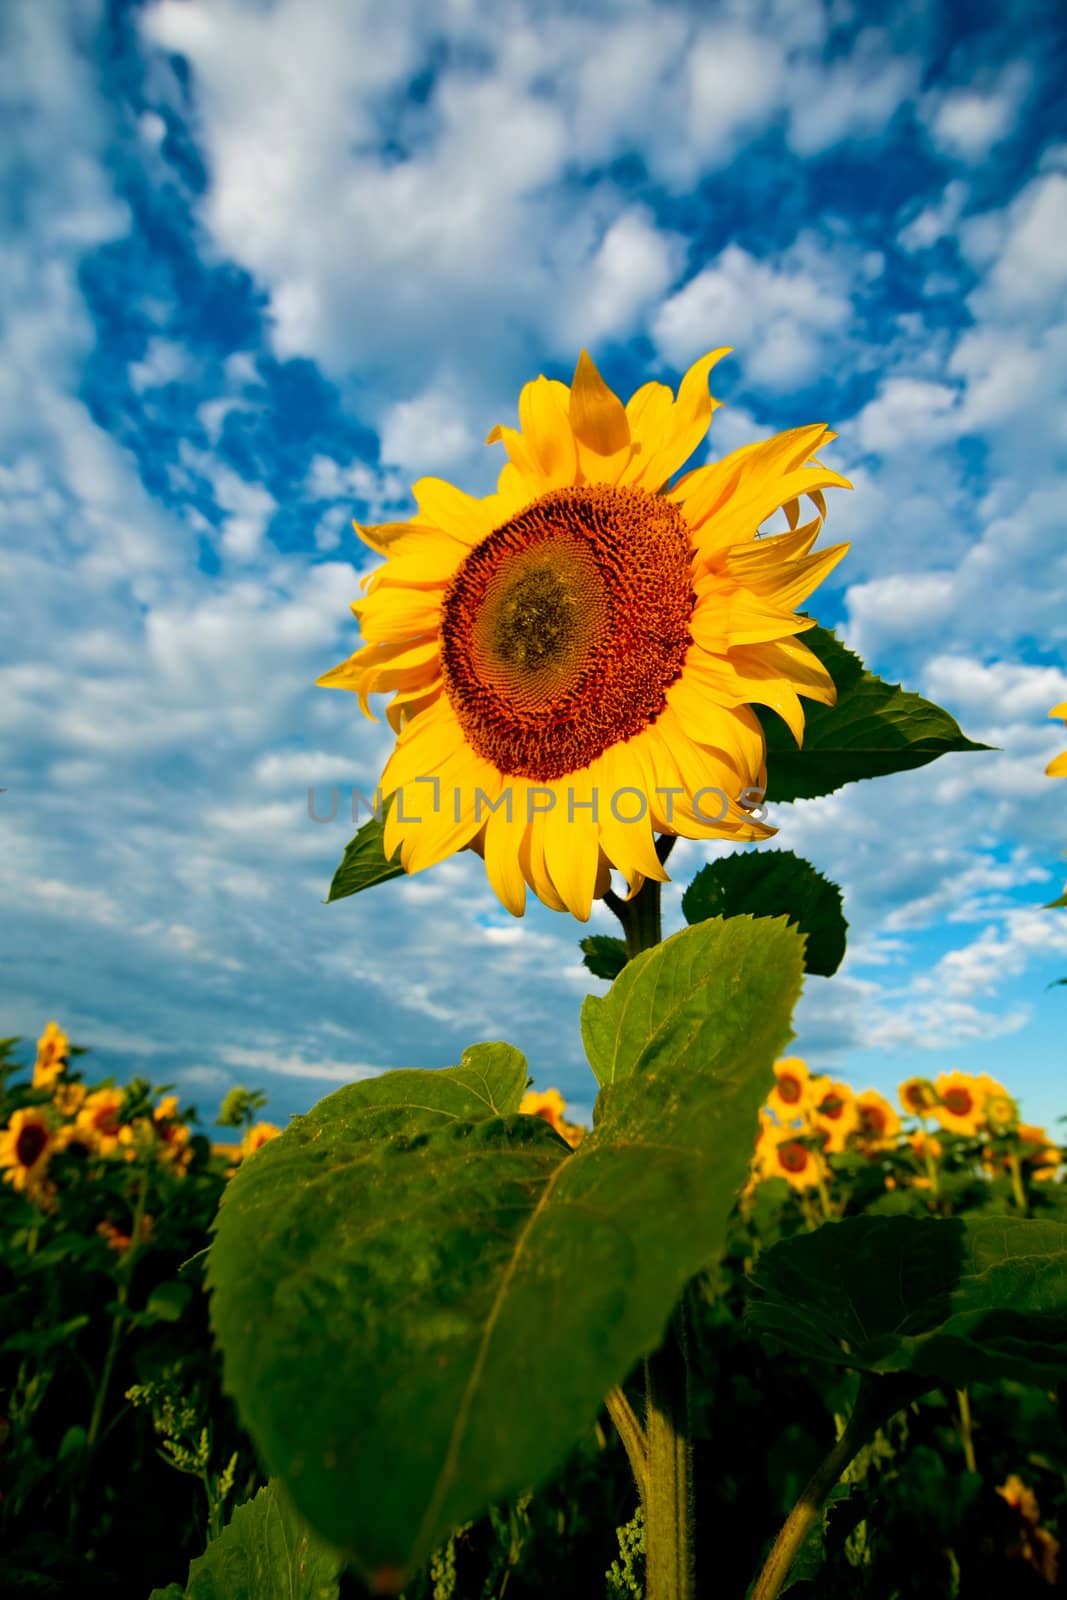 An image of sunflower on background of blue sky